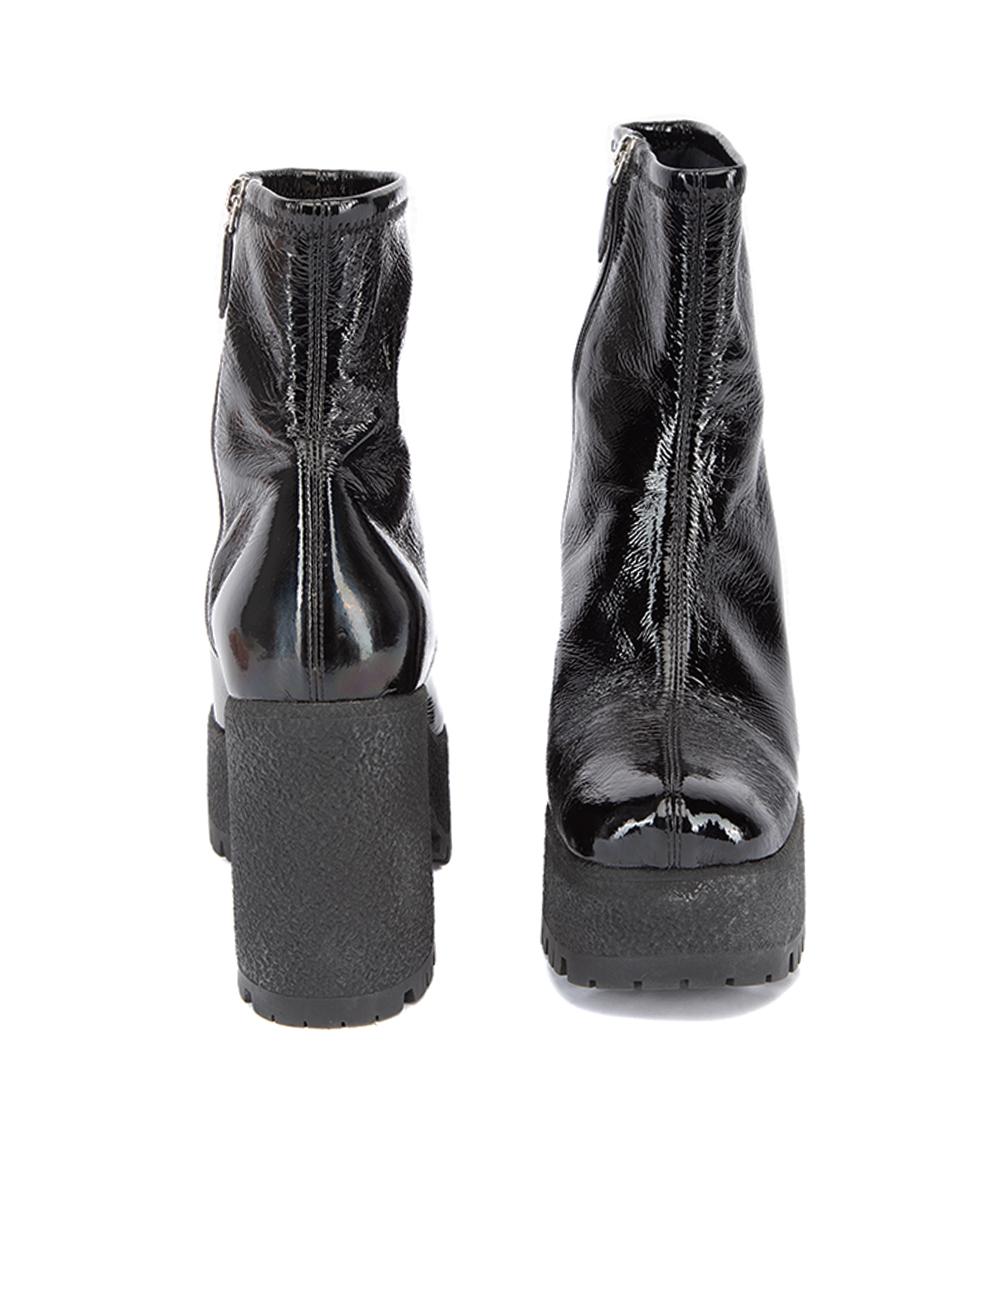 Miu Miu Women's Black Patent Leather Platform Ankle Boots In Good Condition For Sale In London, GB